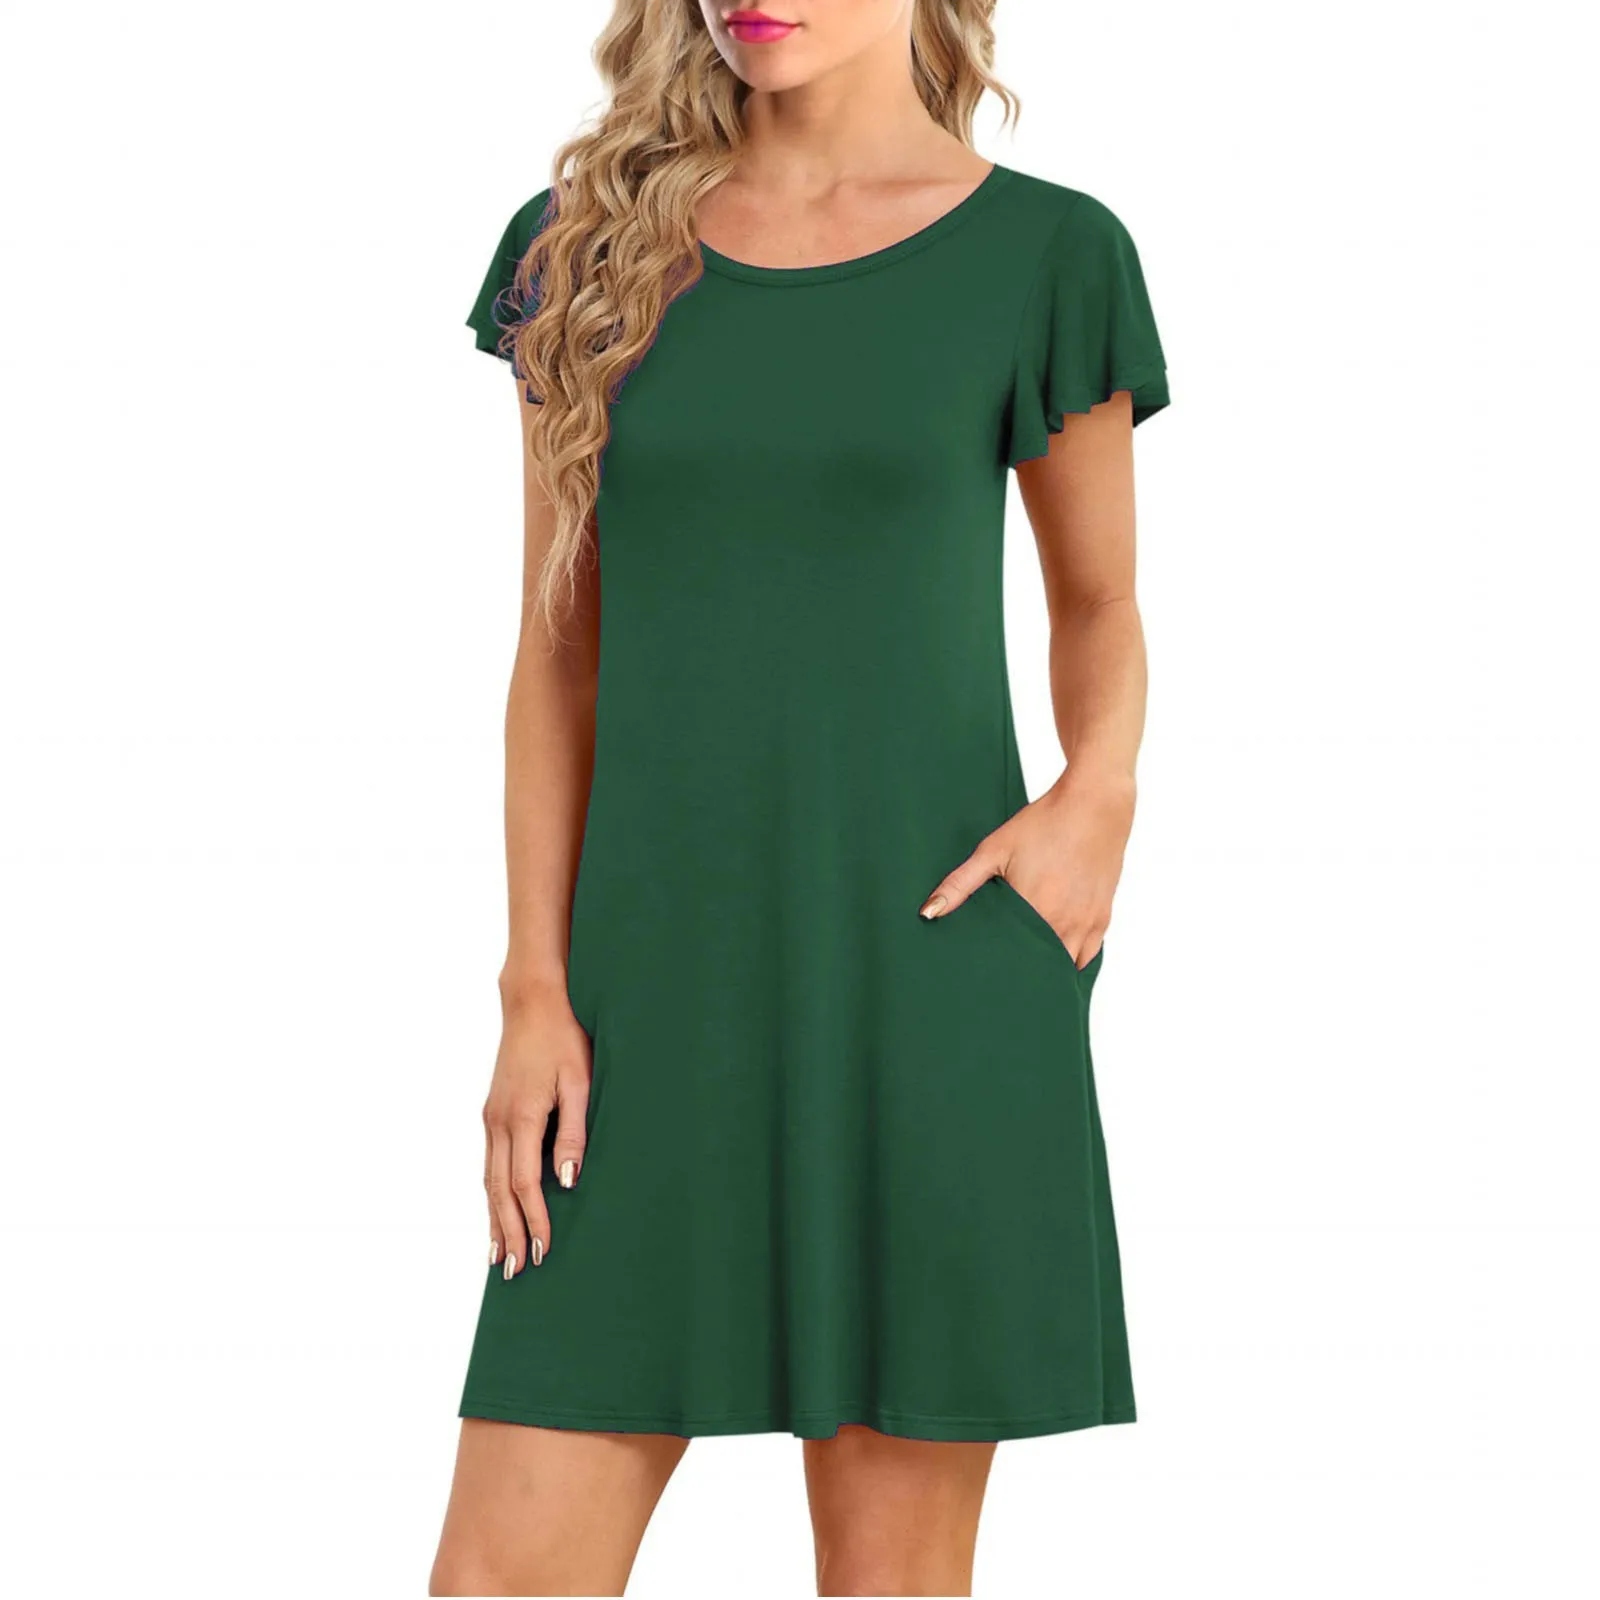 Trending Women O Neck Above Knee Length Dress Casual Solid Color Loose Mini Dresses Summer Short Sleeve Pullover Long T-shirt